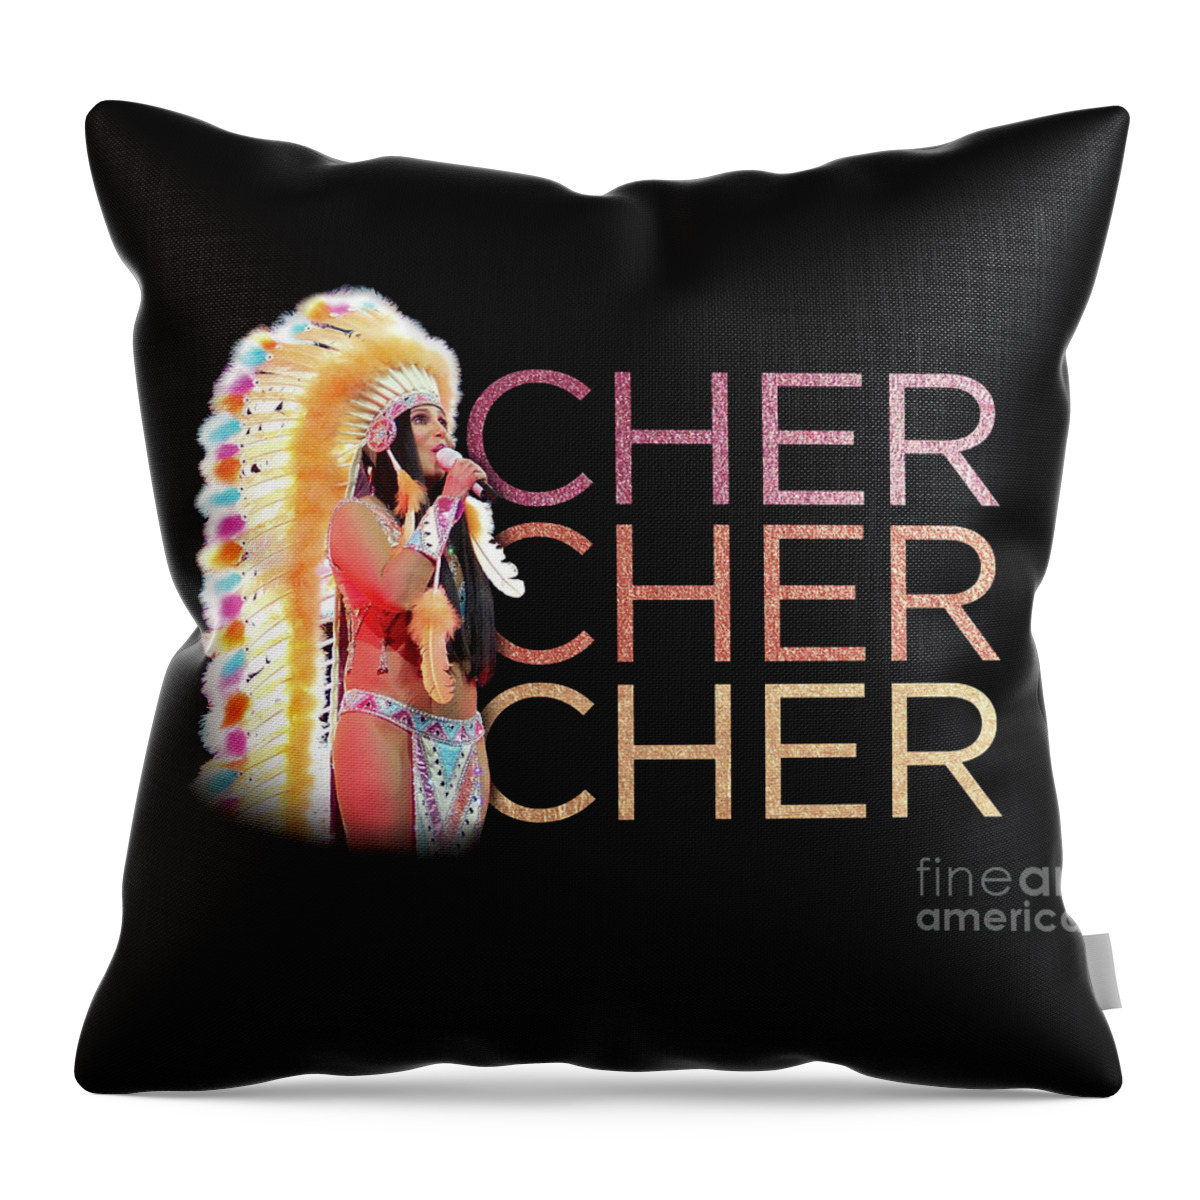 Cher Throw Pillow featuring the digital art Half Breed Cher by Cher Style